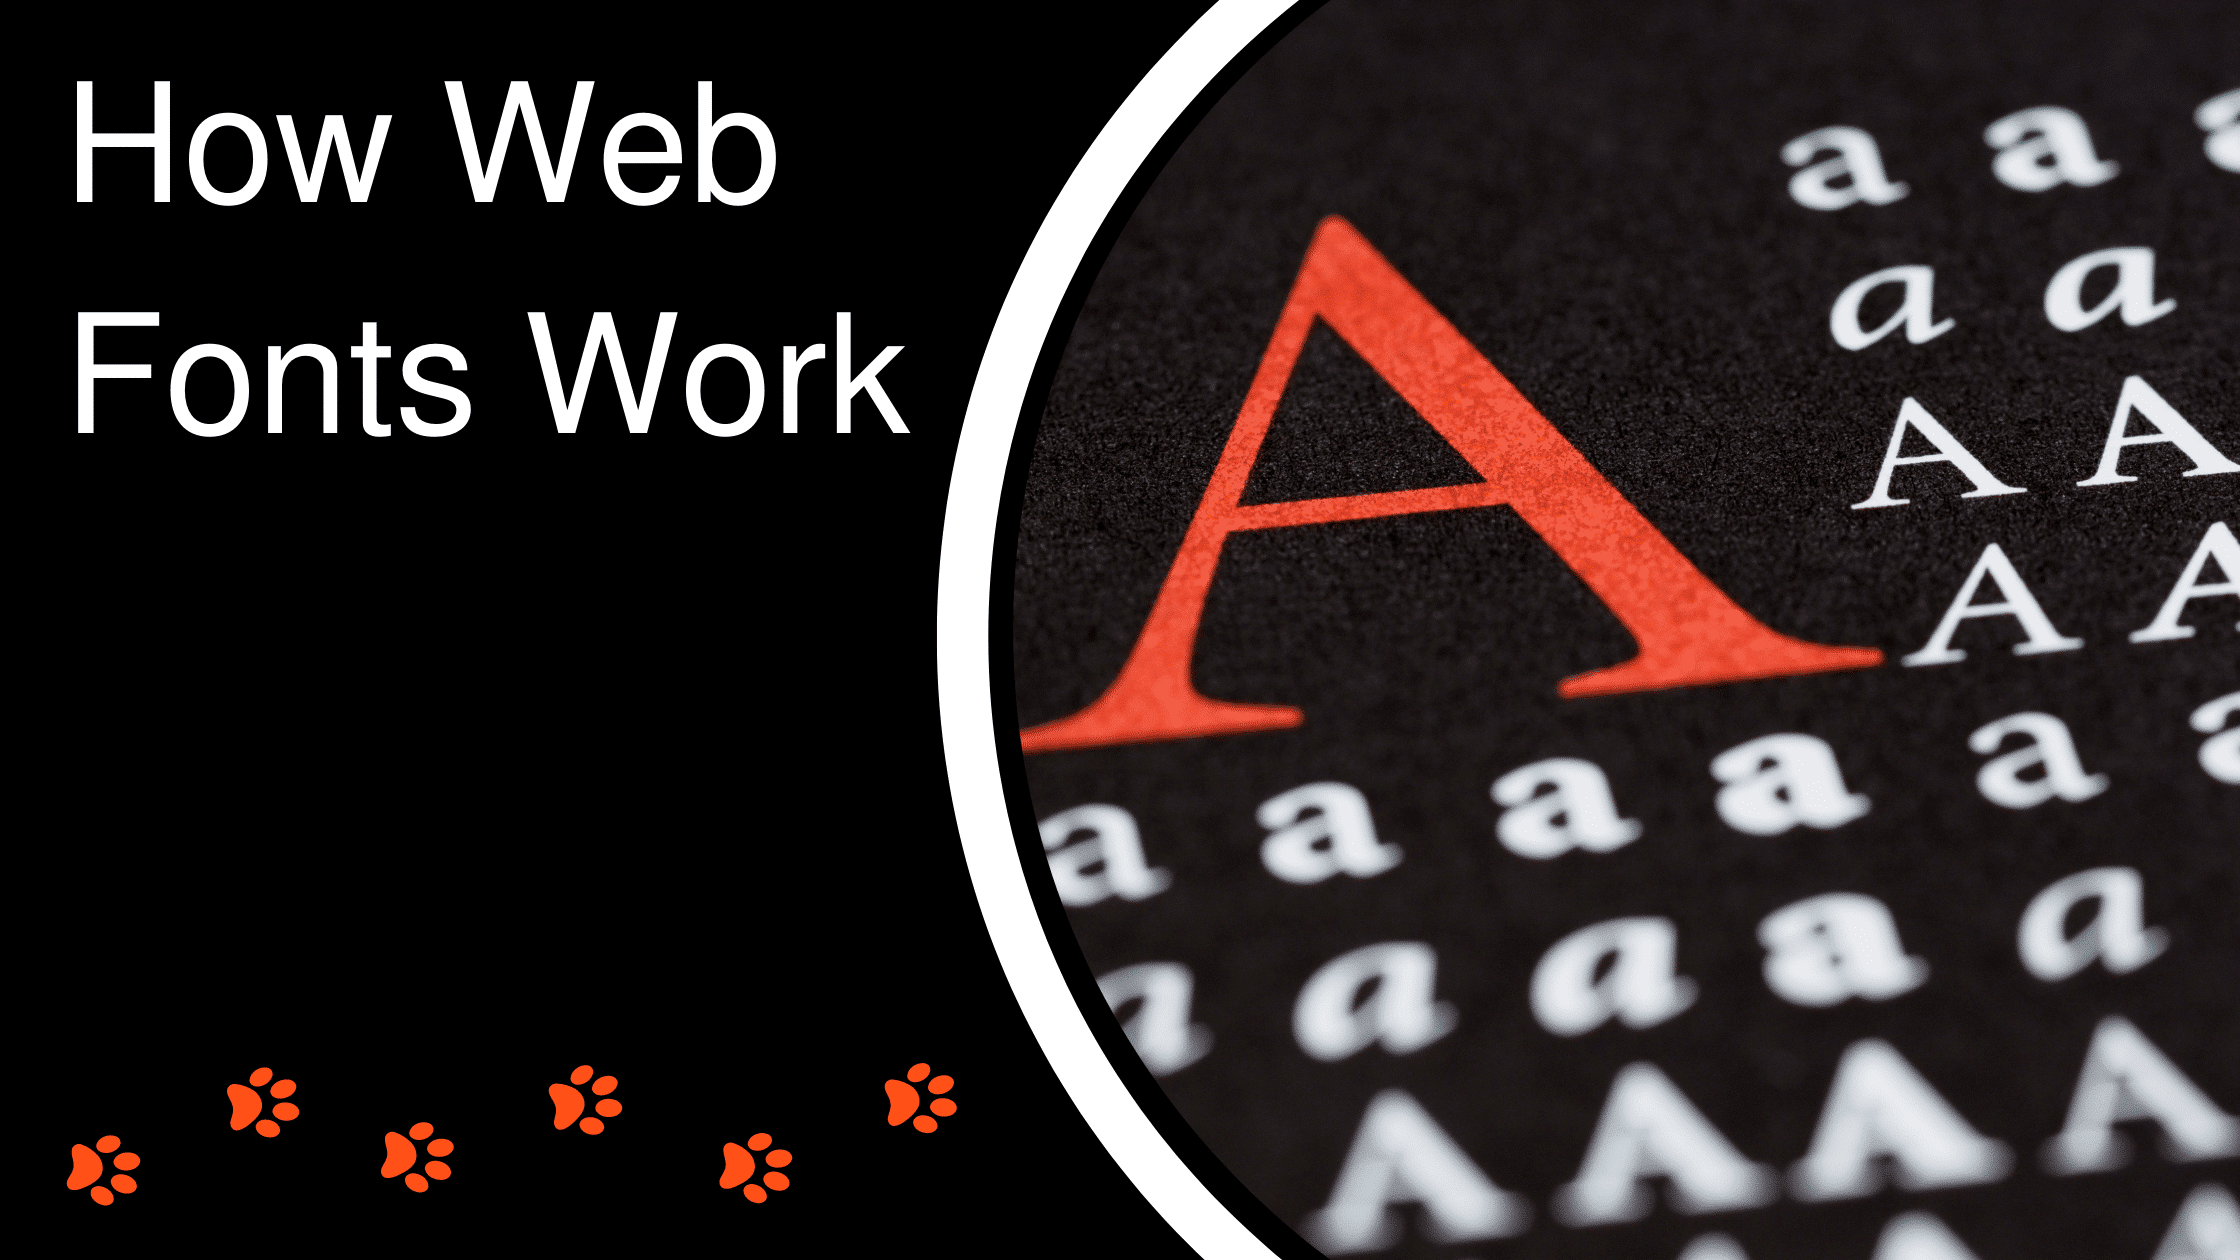 How Web Fonts Work